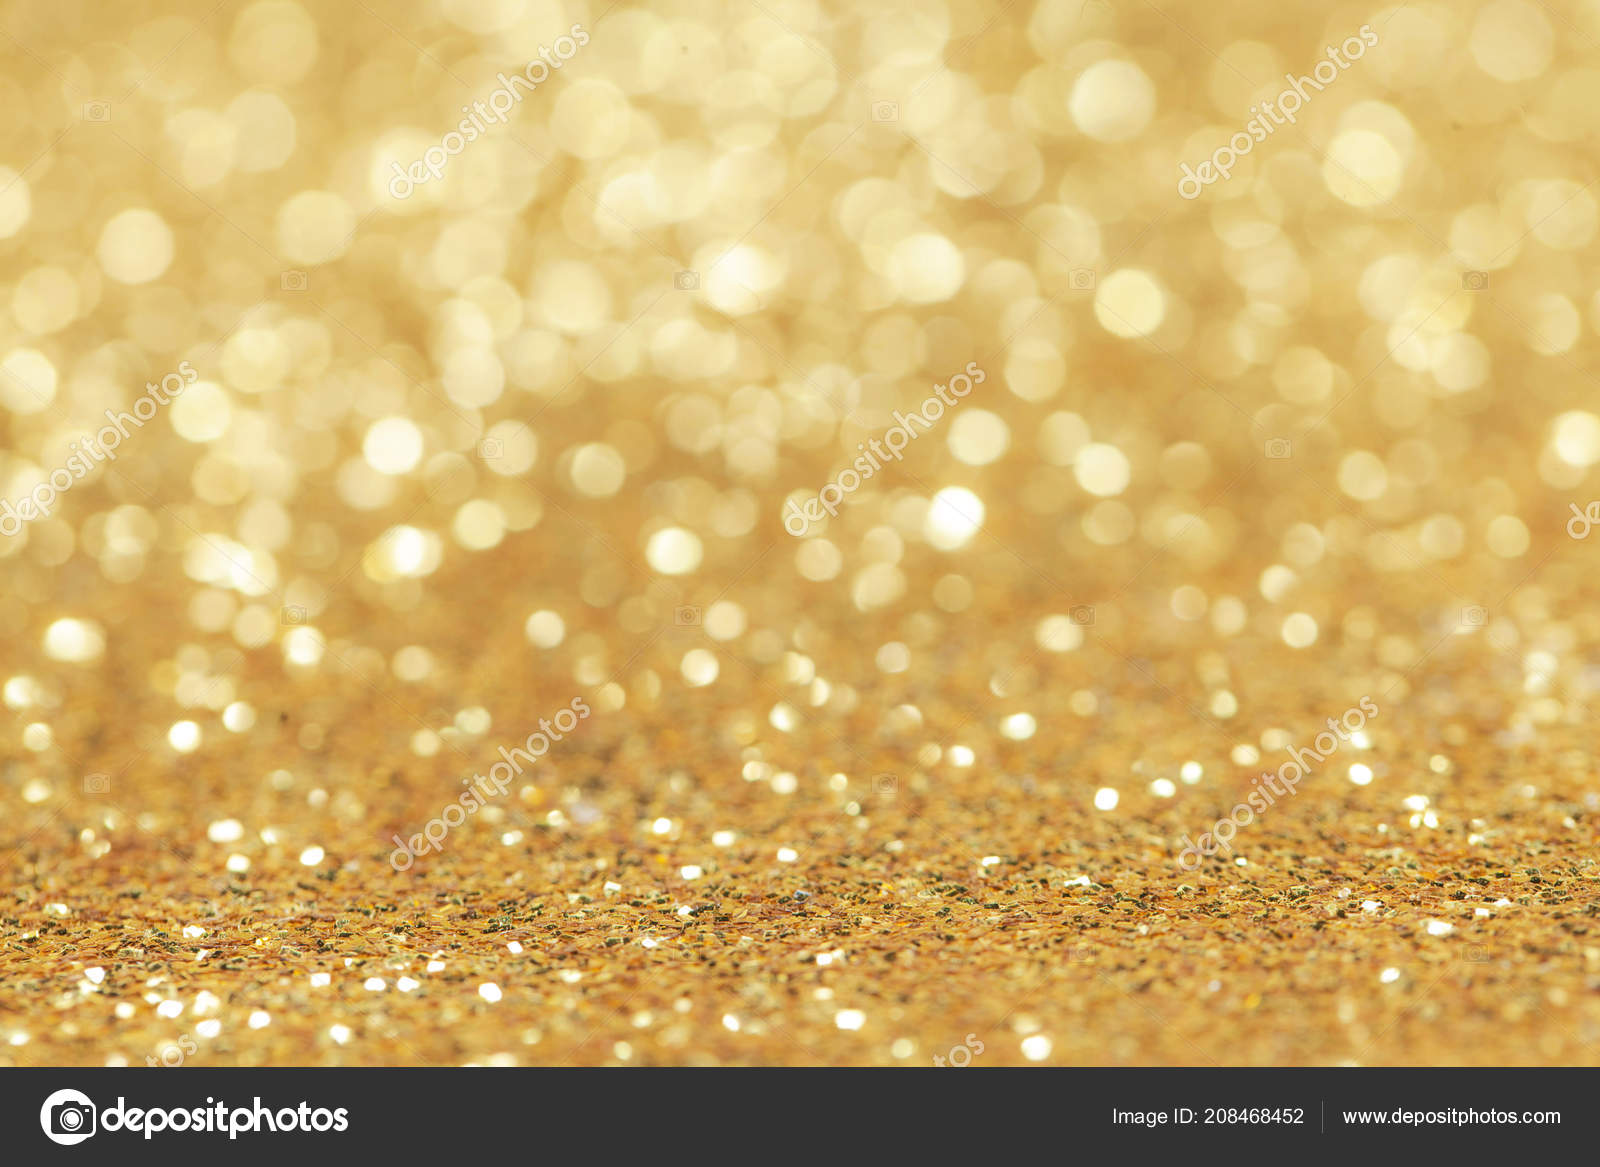 10x6.5ft Golden Bokeh Backdrop Dreamy Champagne Glitters Shiny Sparkles Photography Background Wallpaper Birthday Party Girls Adults Artistic Portrait Vlogger Blogger Studio Video Props 